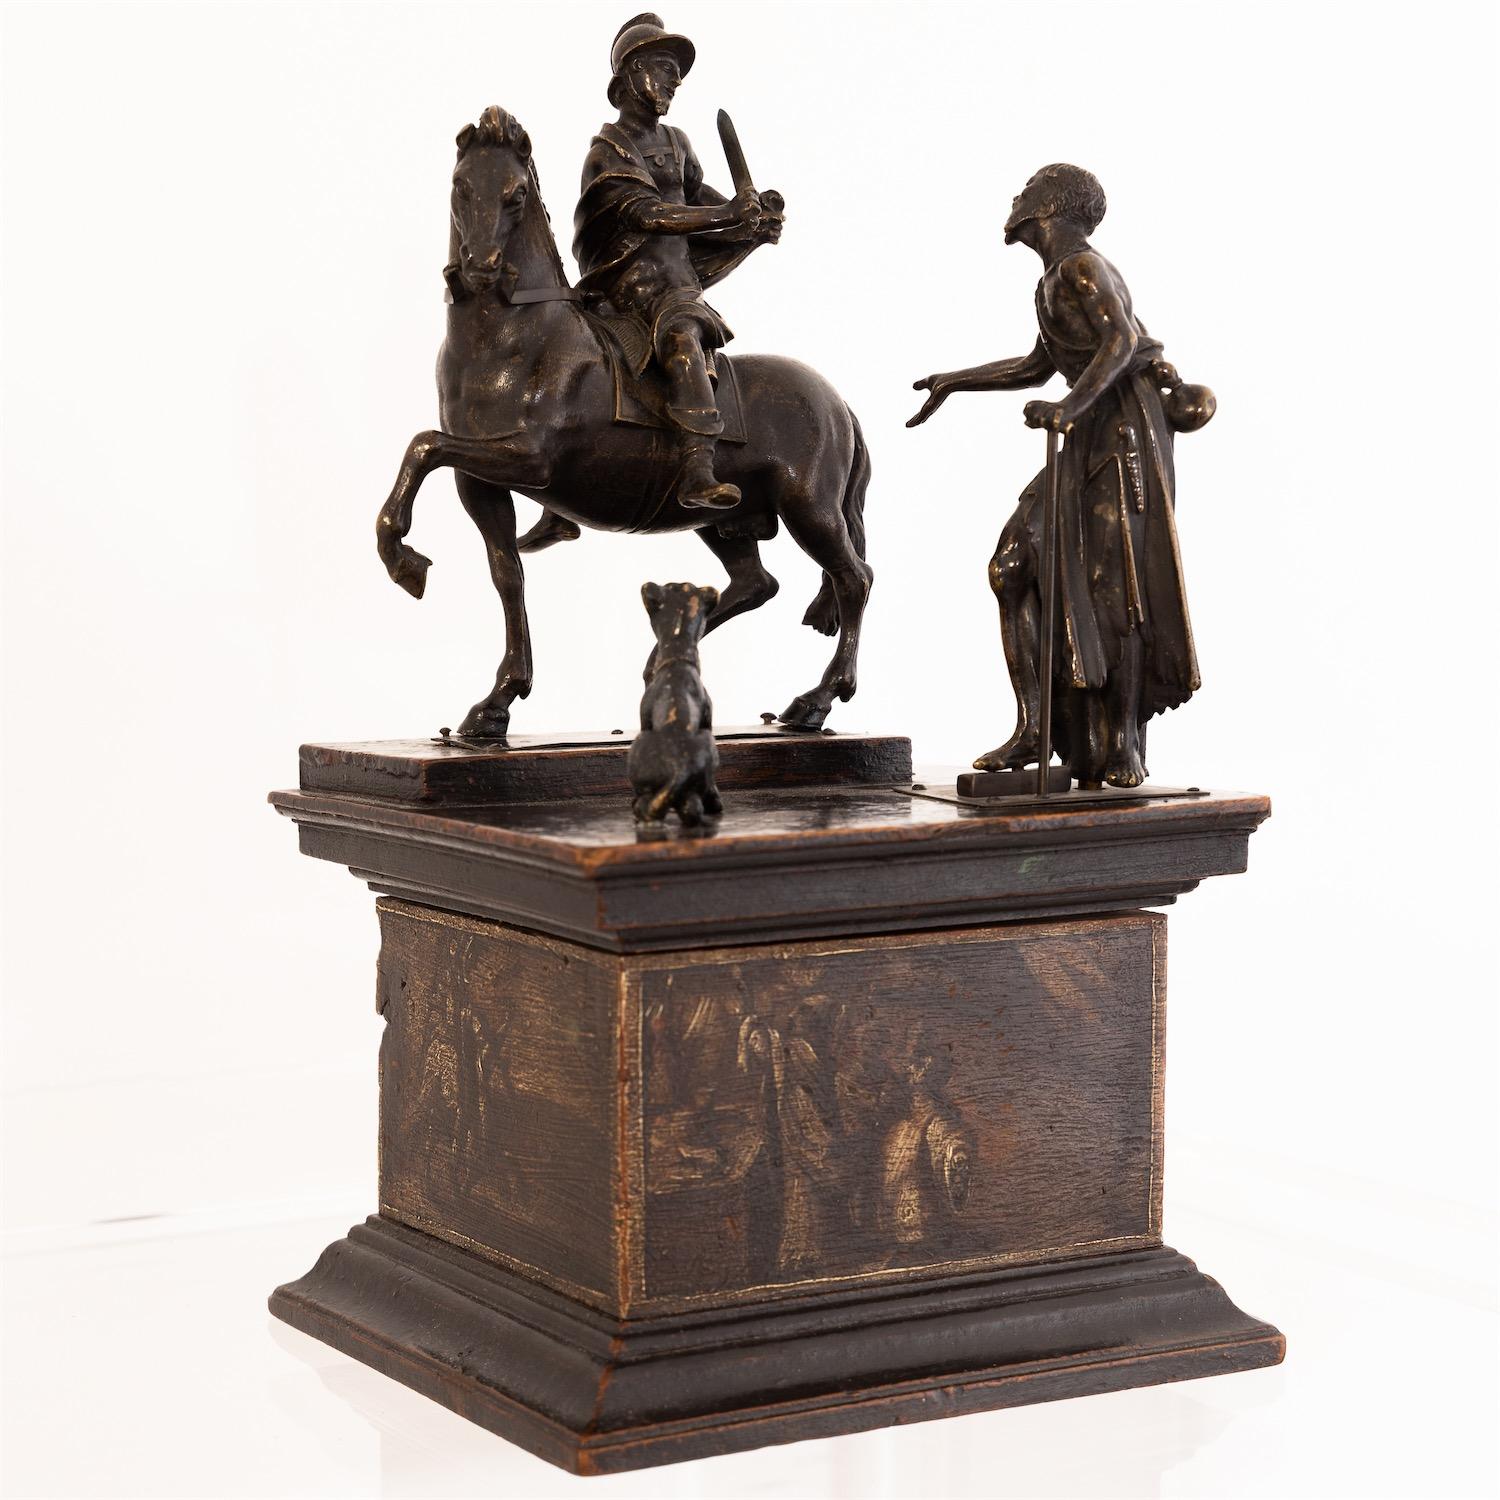 Italian Bronze Group of St. Martin with Beggar and Dog, Northern Italy, 17th Century